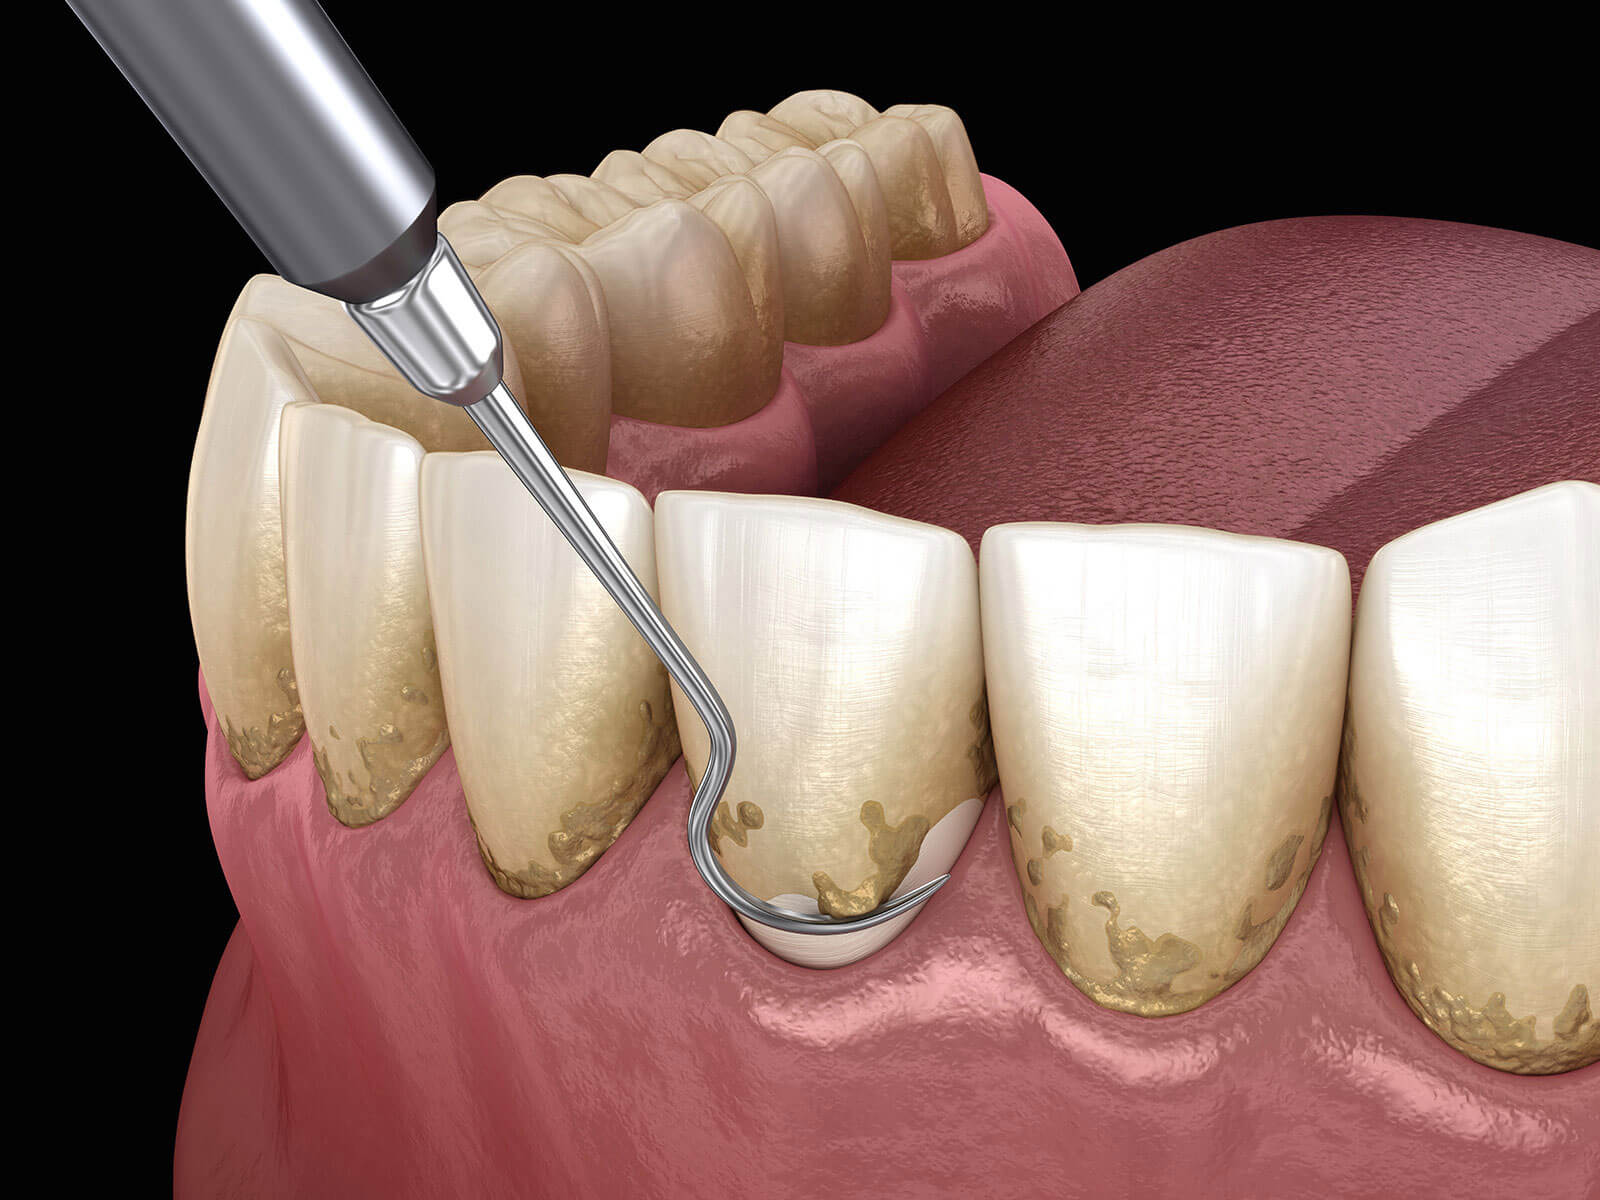 Importance of Scaling And Root Planing In Preventing Gum Disease